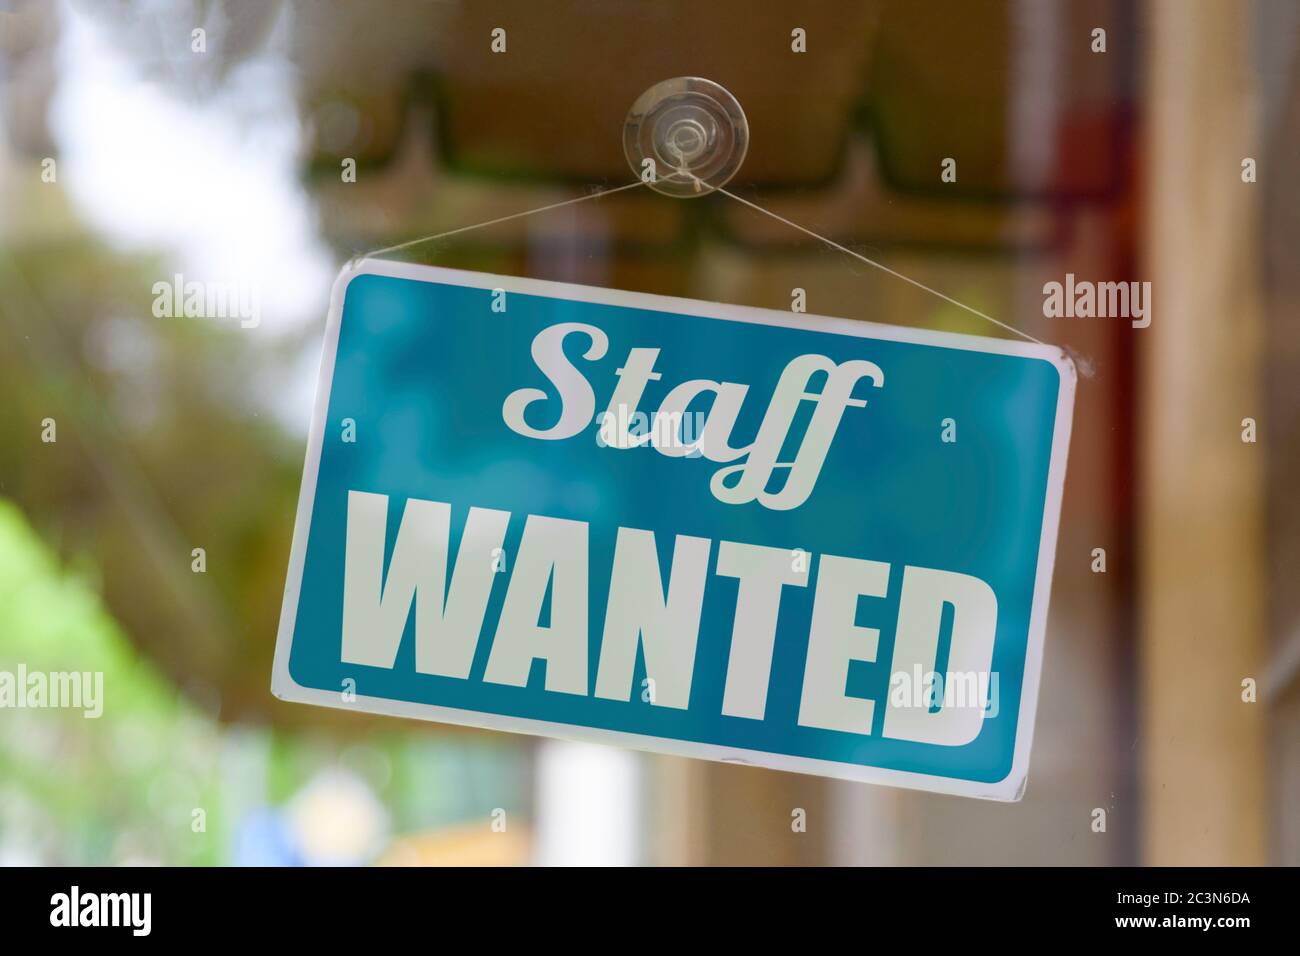 Close-up on a blue open sign in the window of a shop displaying the message: Staff wanted. Stock Photo